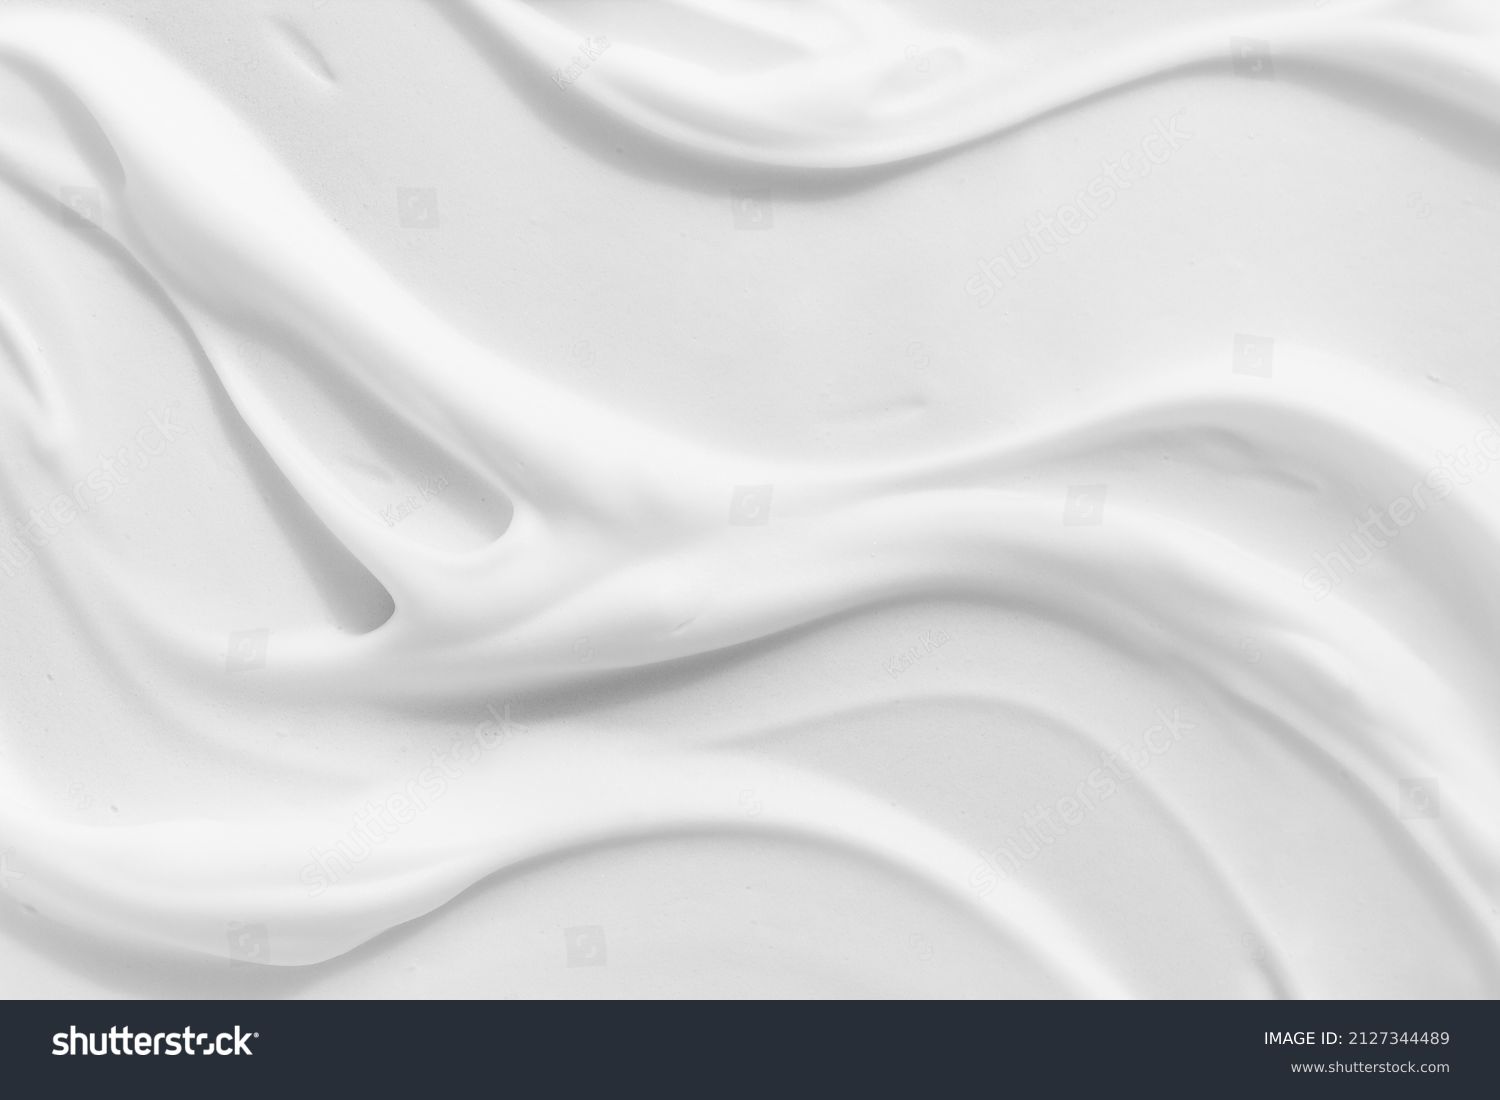 White foam cream texture. Cosmetic cleanser, shower gel, shaving foam background. Creamy cleansing skincare product bubbles #2127344489